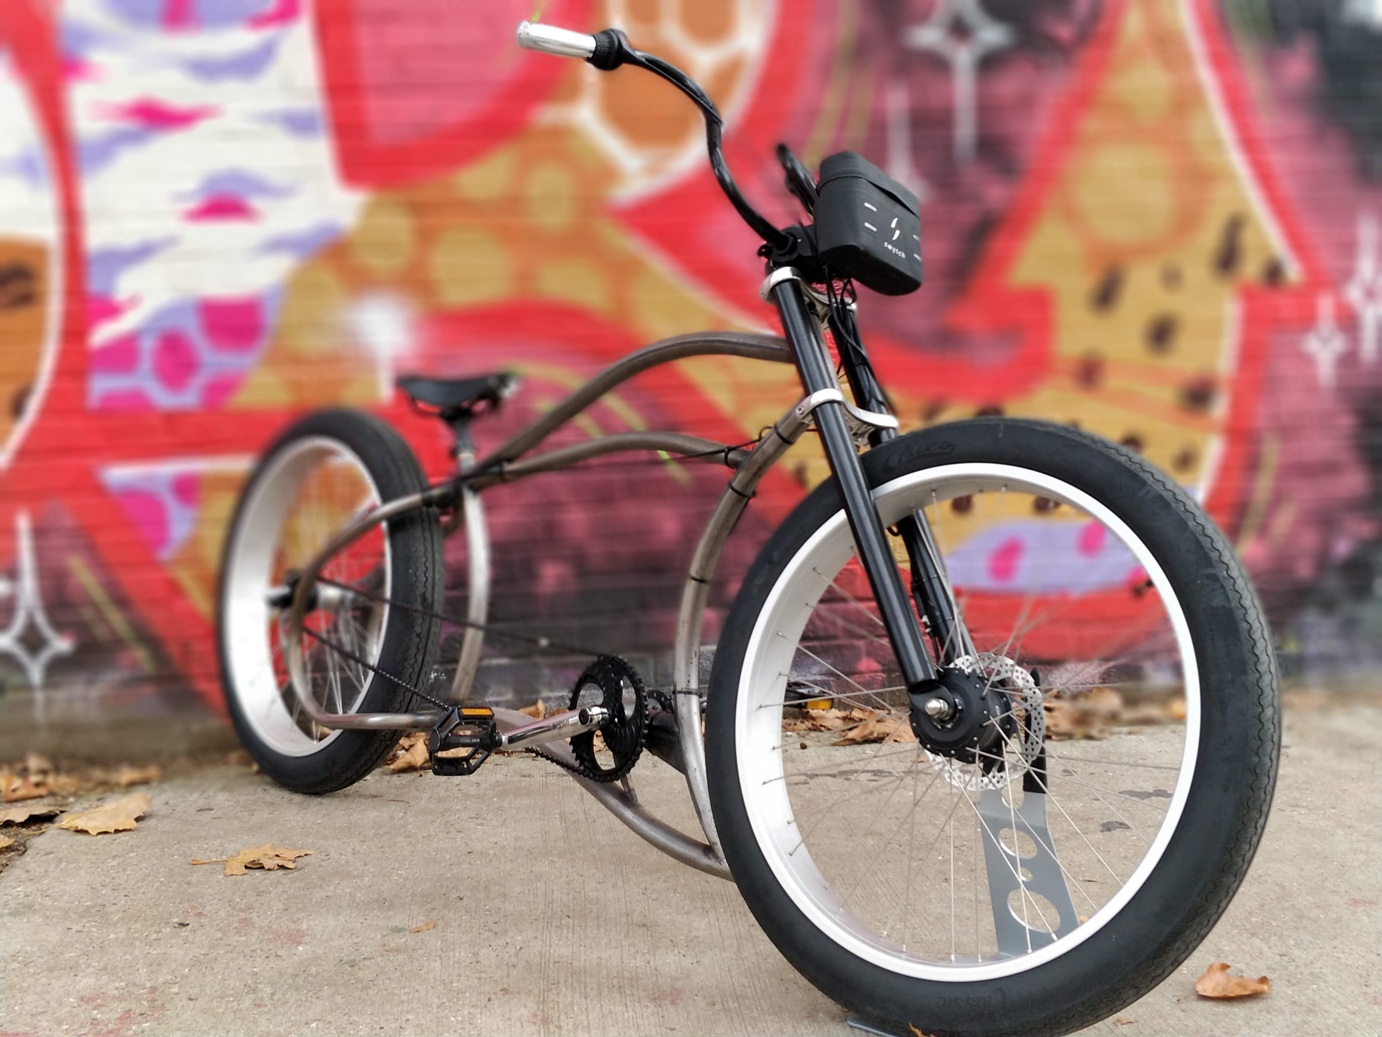 Electric bike conversion kits can be fitted to any type of bicycle